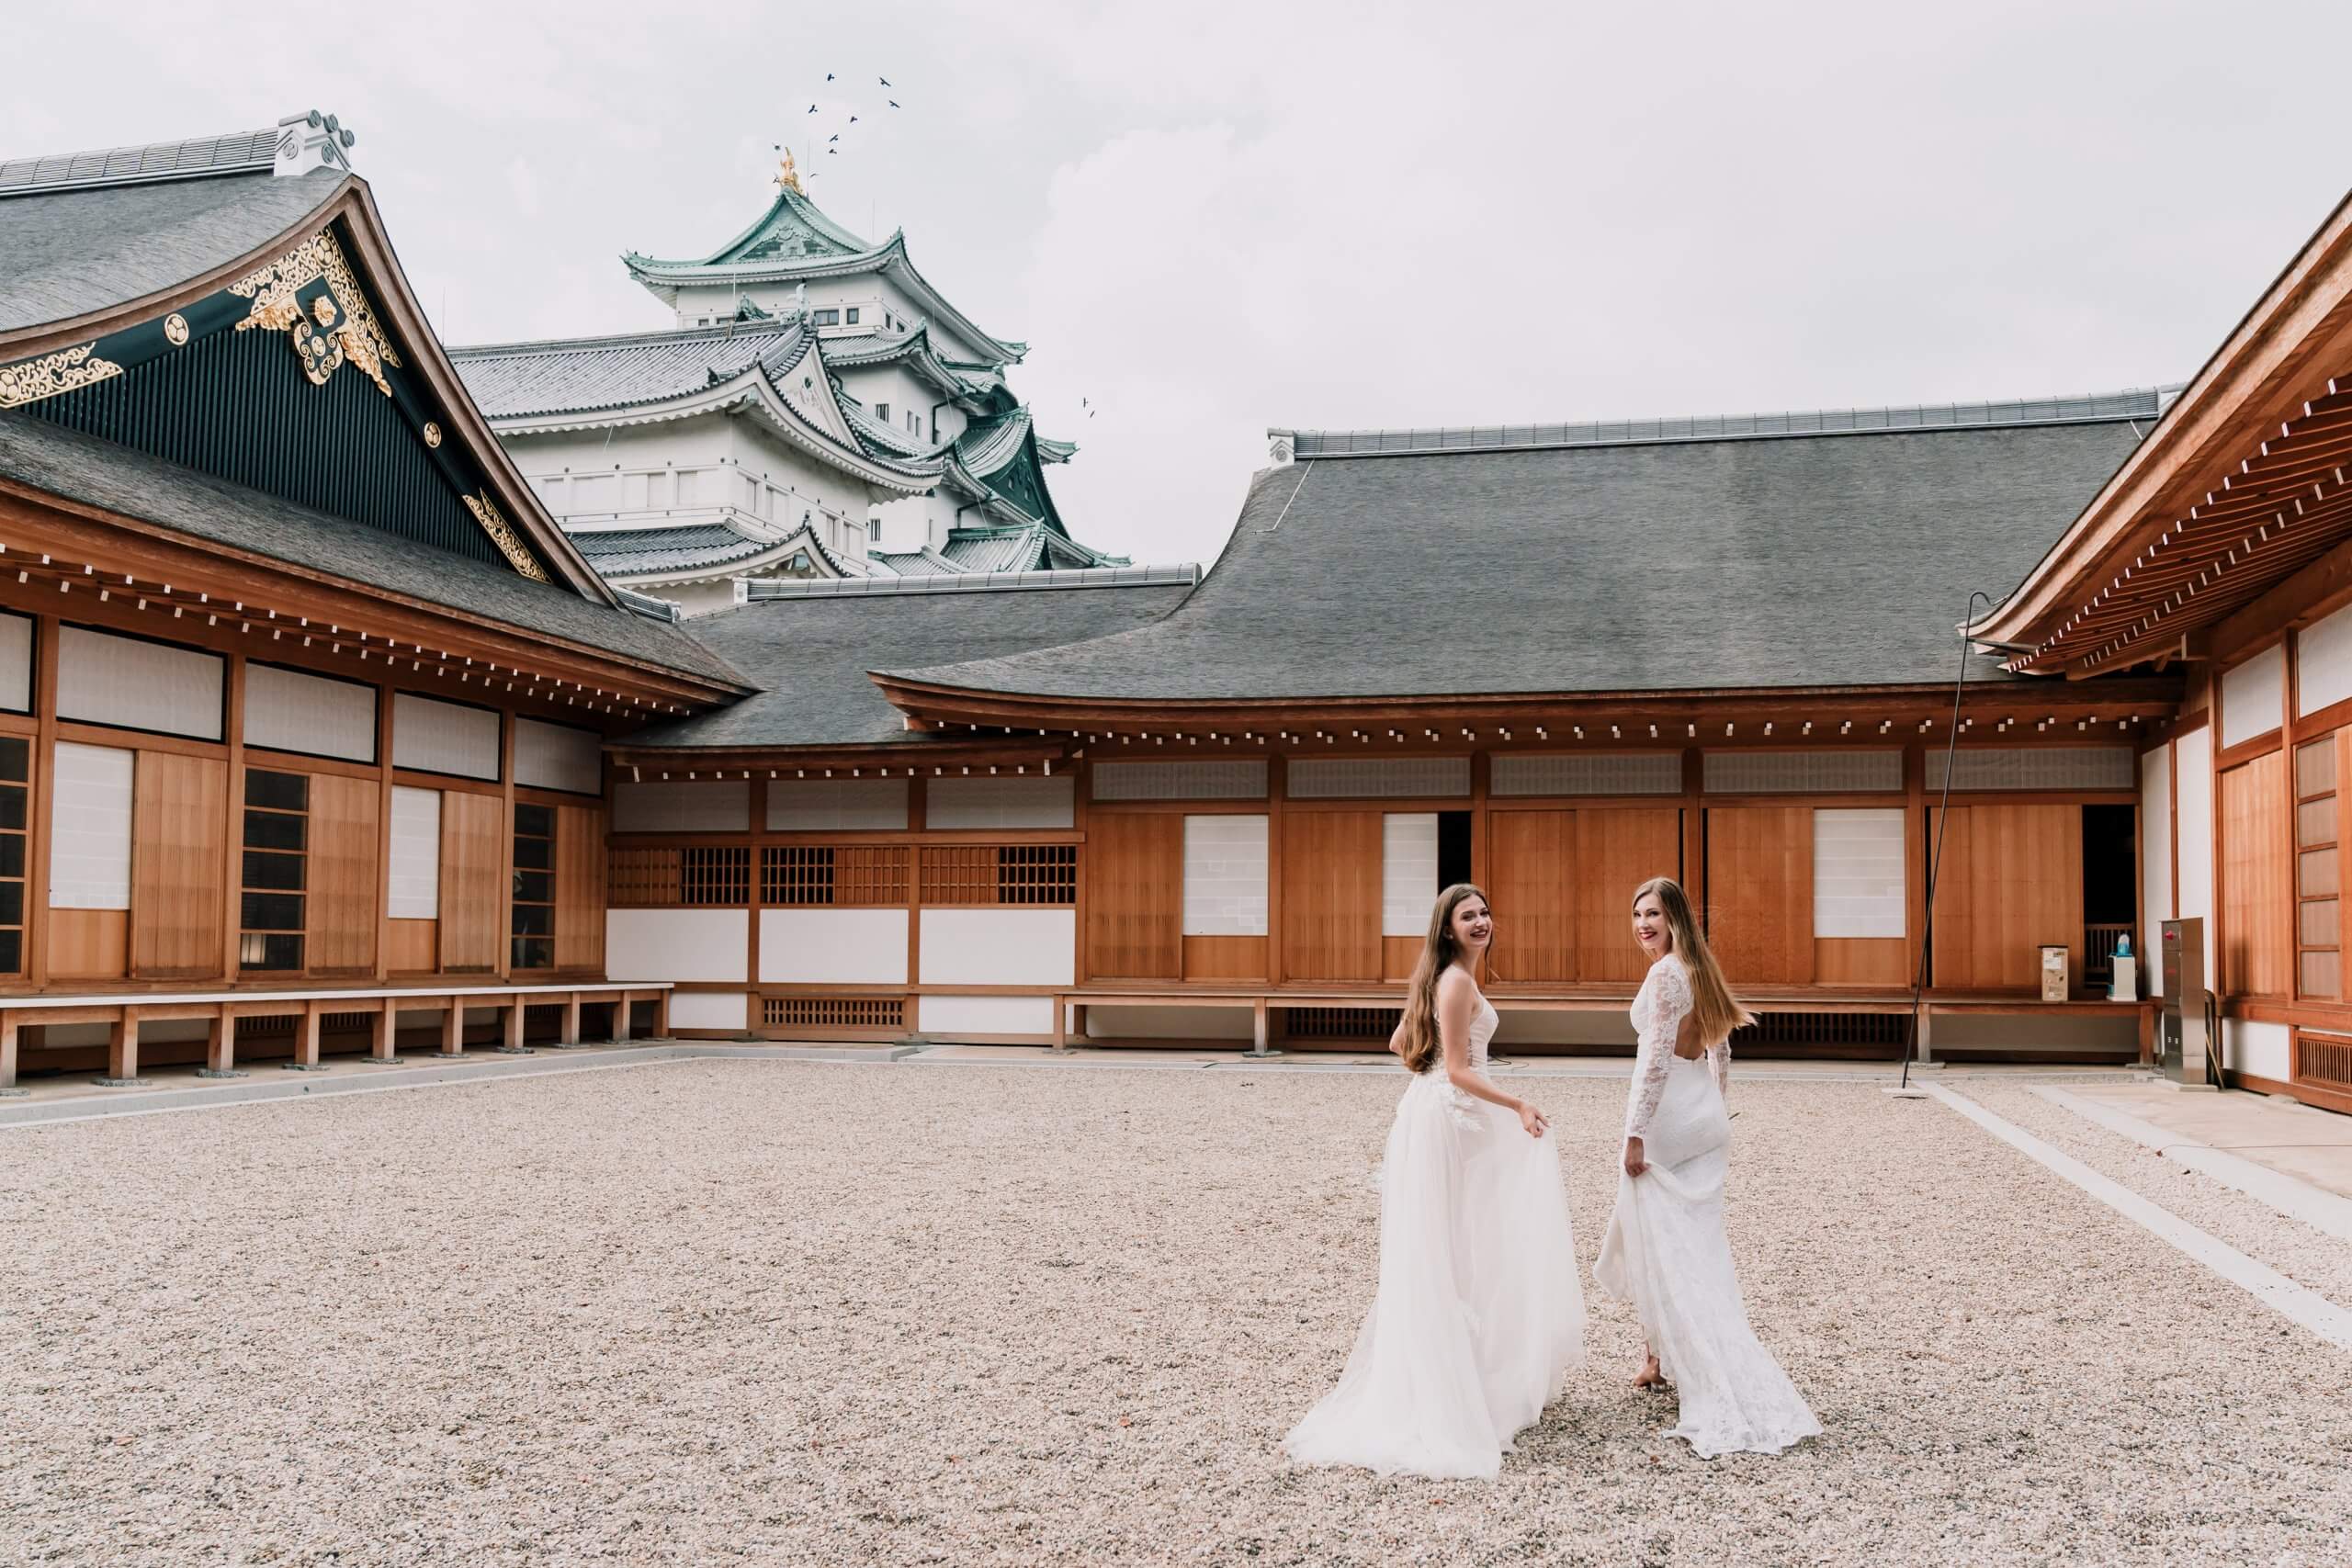 Lovely couple, inside a Japanese compound, captured by Black Avenue Productions